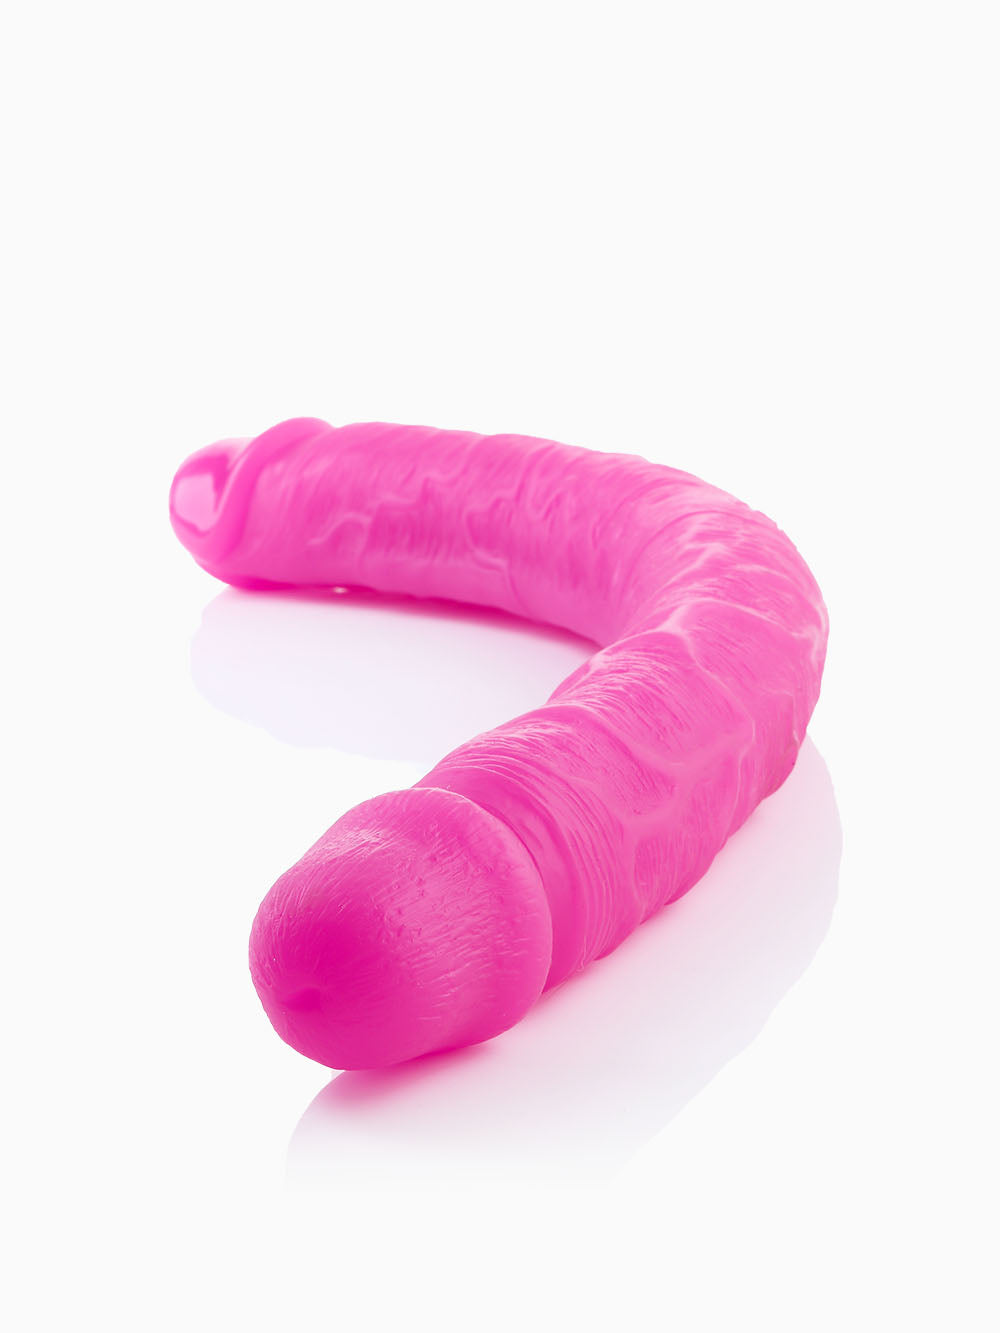 Pillow Talk Ultimate Dildo, 18 Inches, Pink